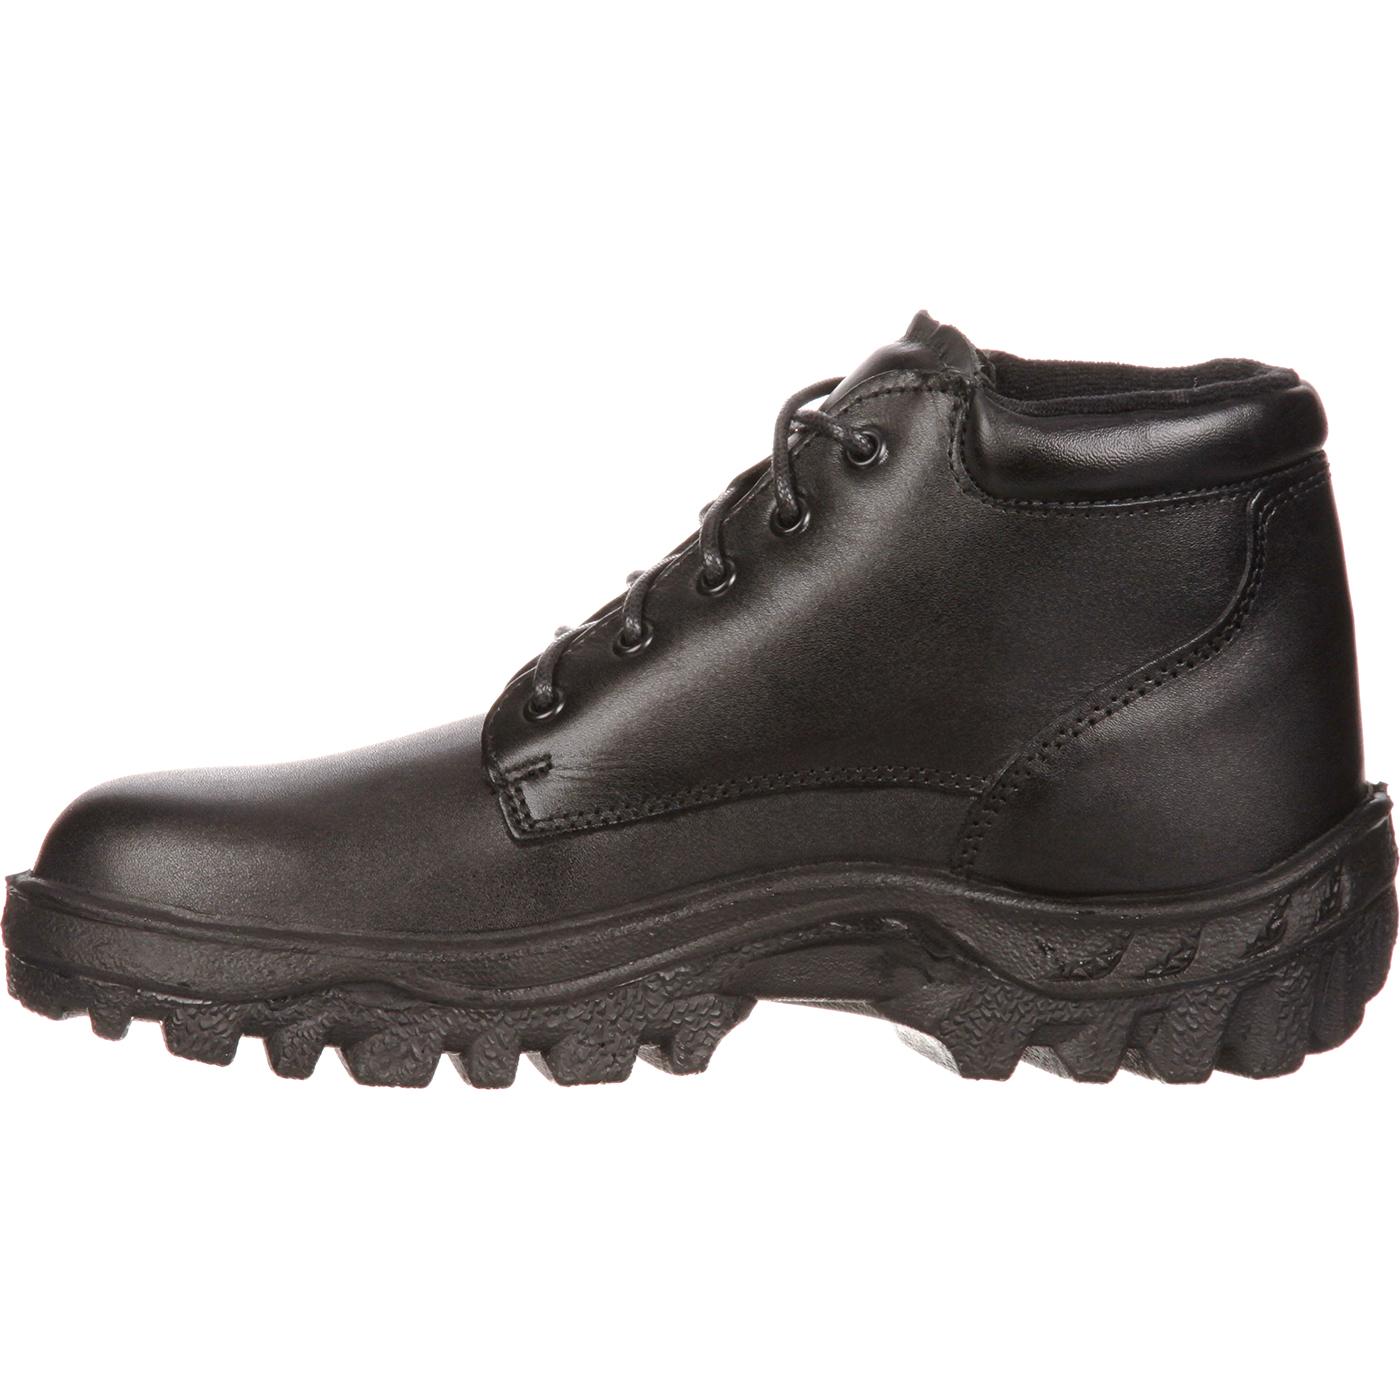 Rocky Mens Tmc Duty Pt Chk Casual Boots Boots - - image 5 of 7